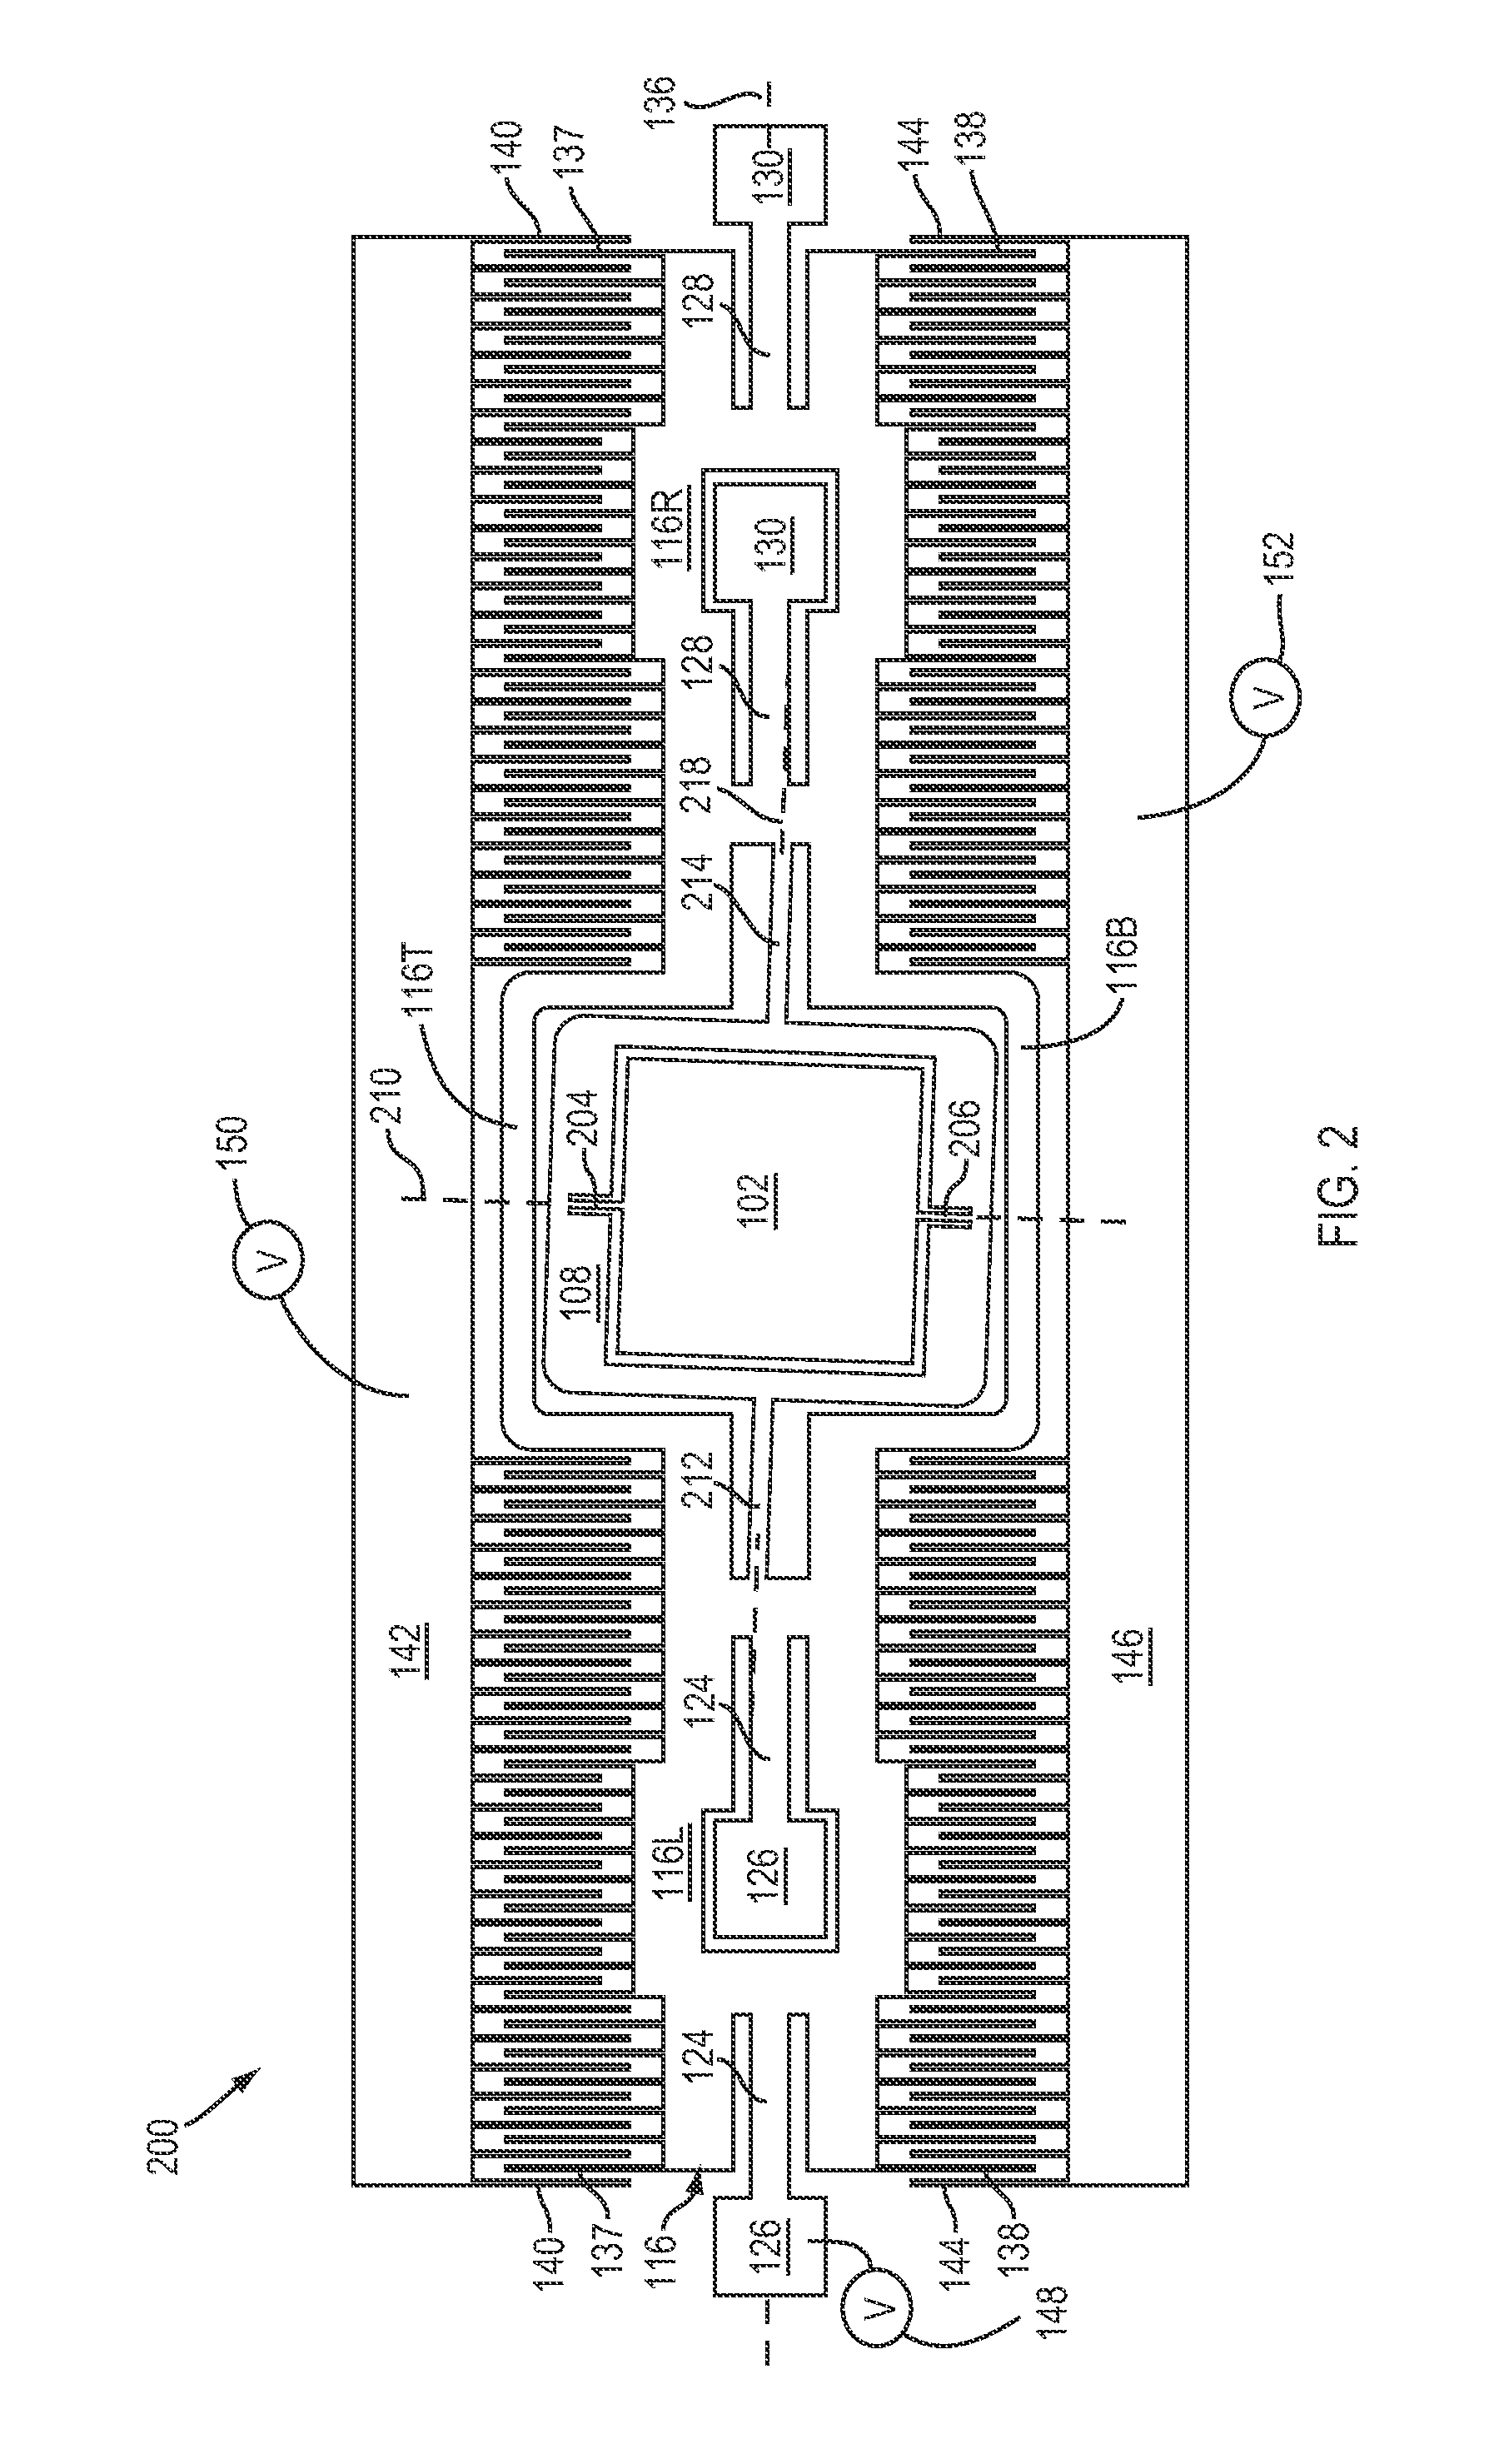 MEMS device with off-axis actuator